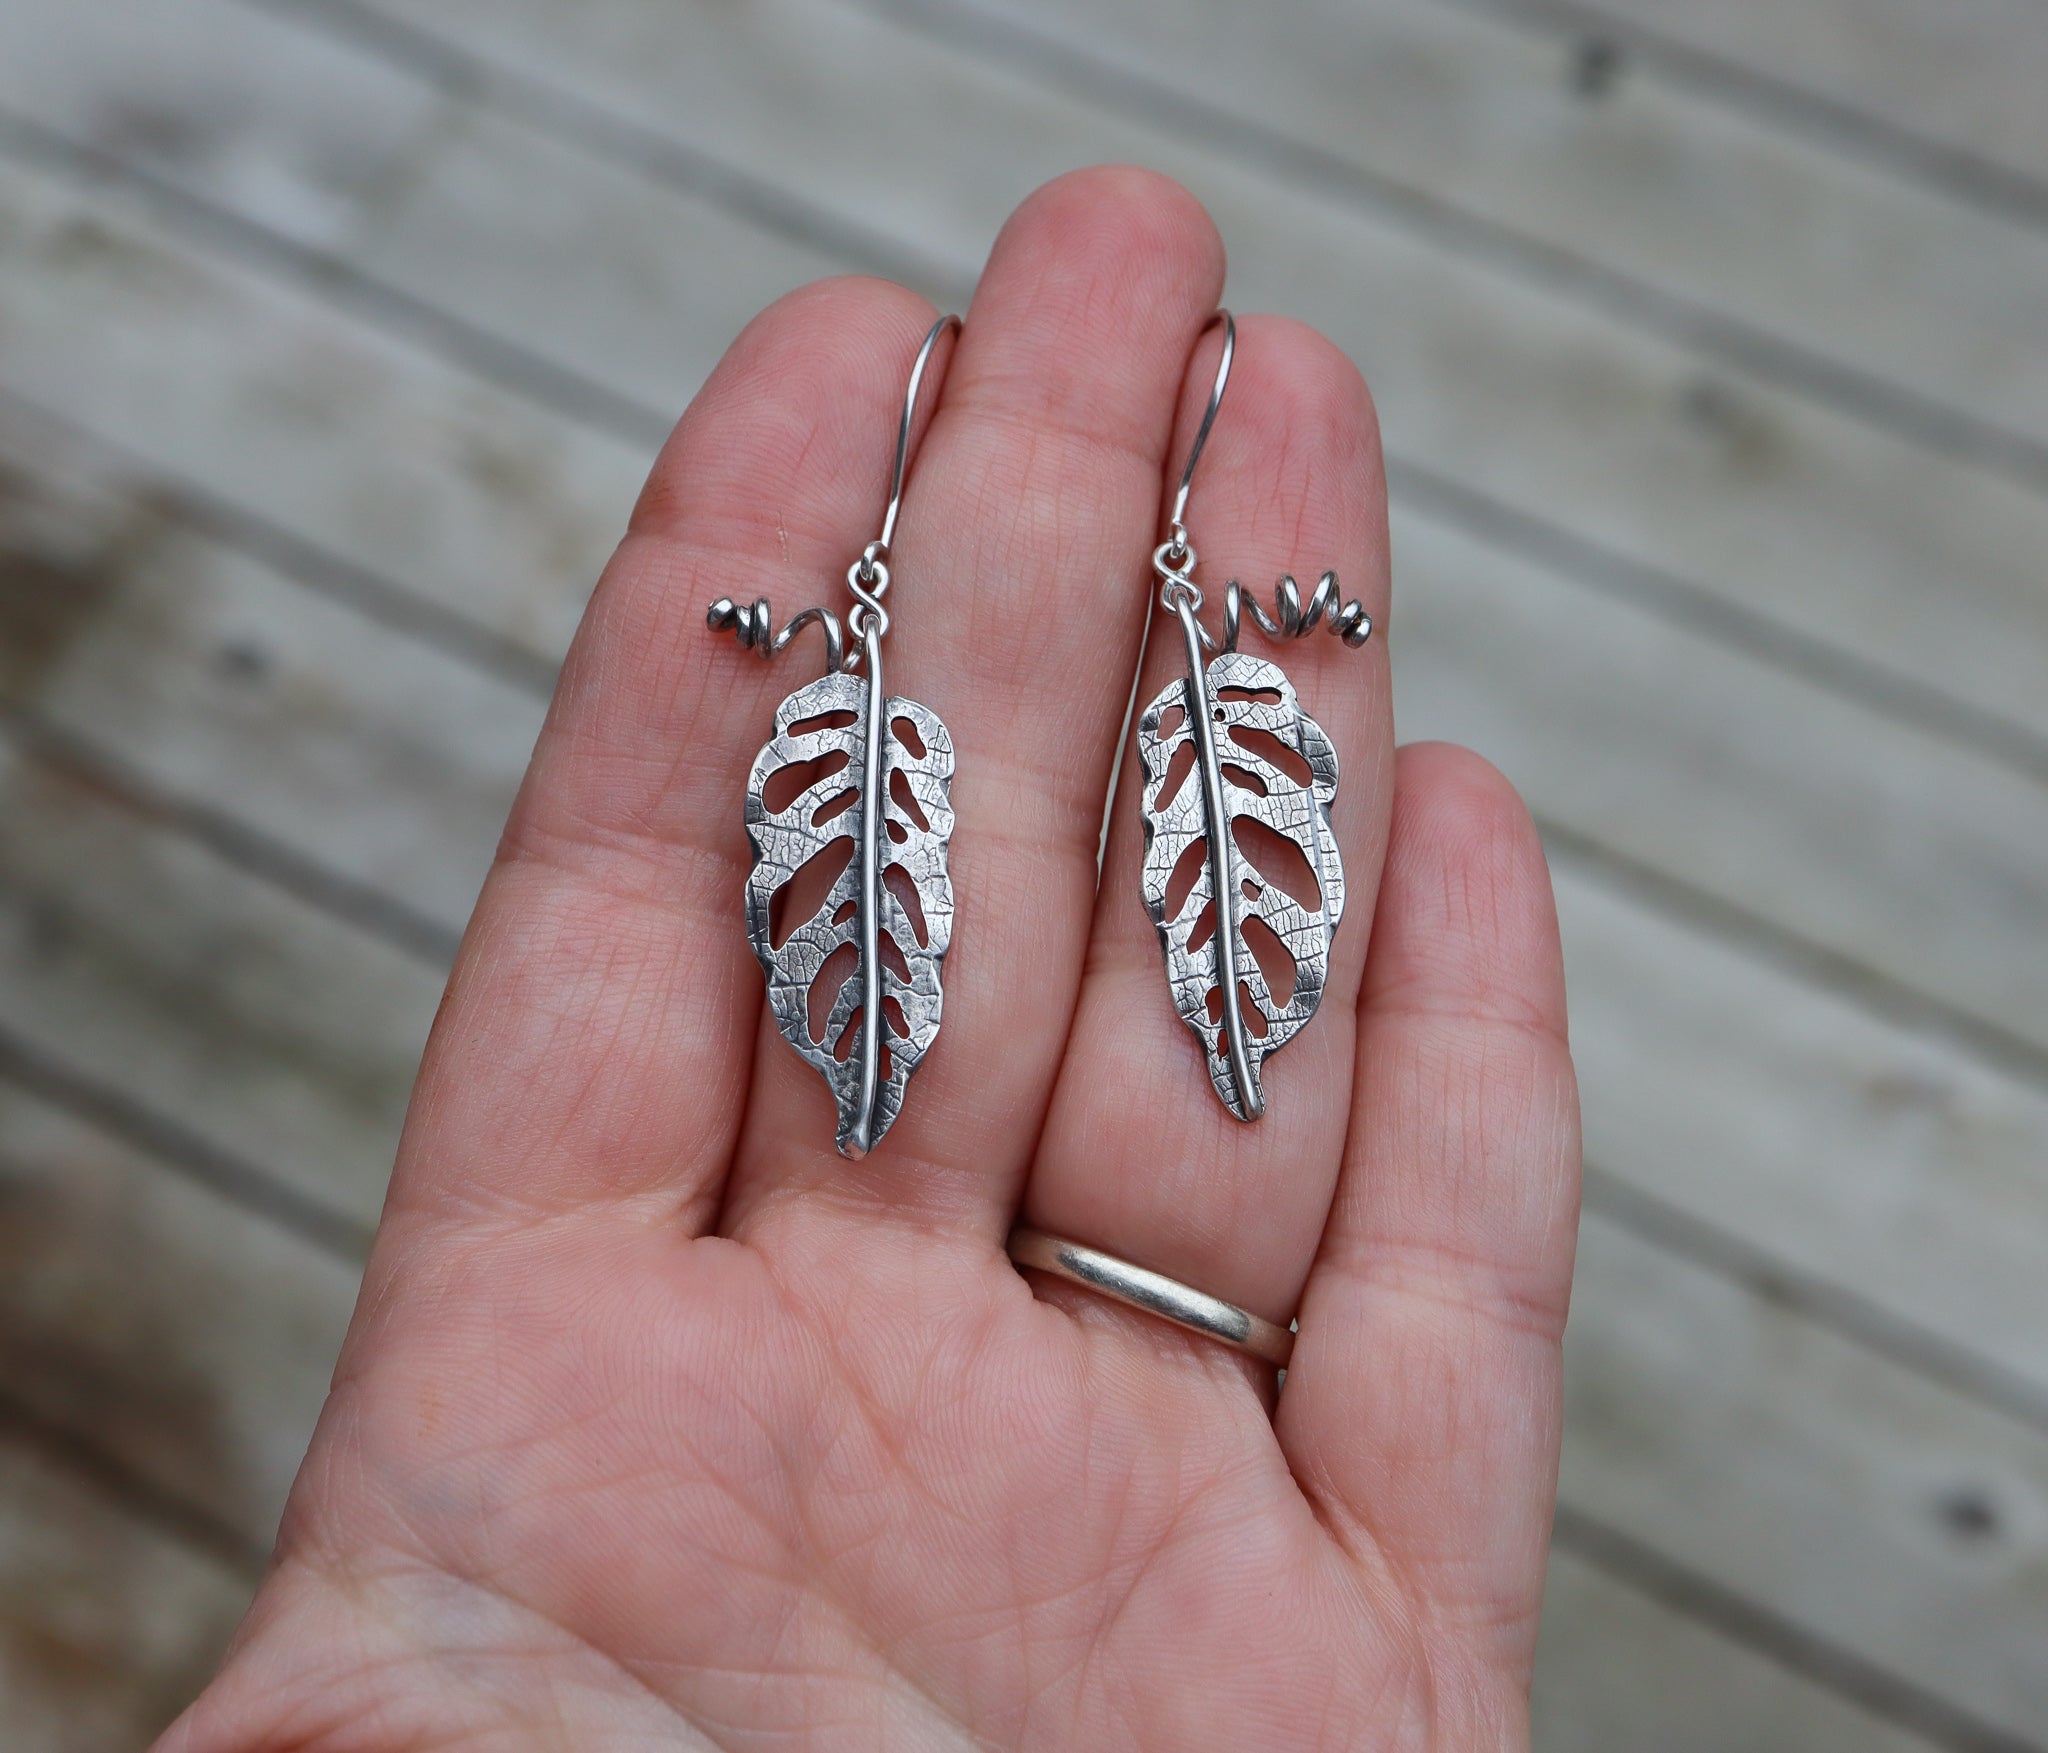 Sterling silver handmade monstera adansonii dangle earrings made by The Striped Cat Metalworks. They are pictured in a hand to show size. 